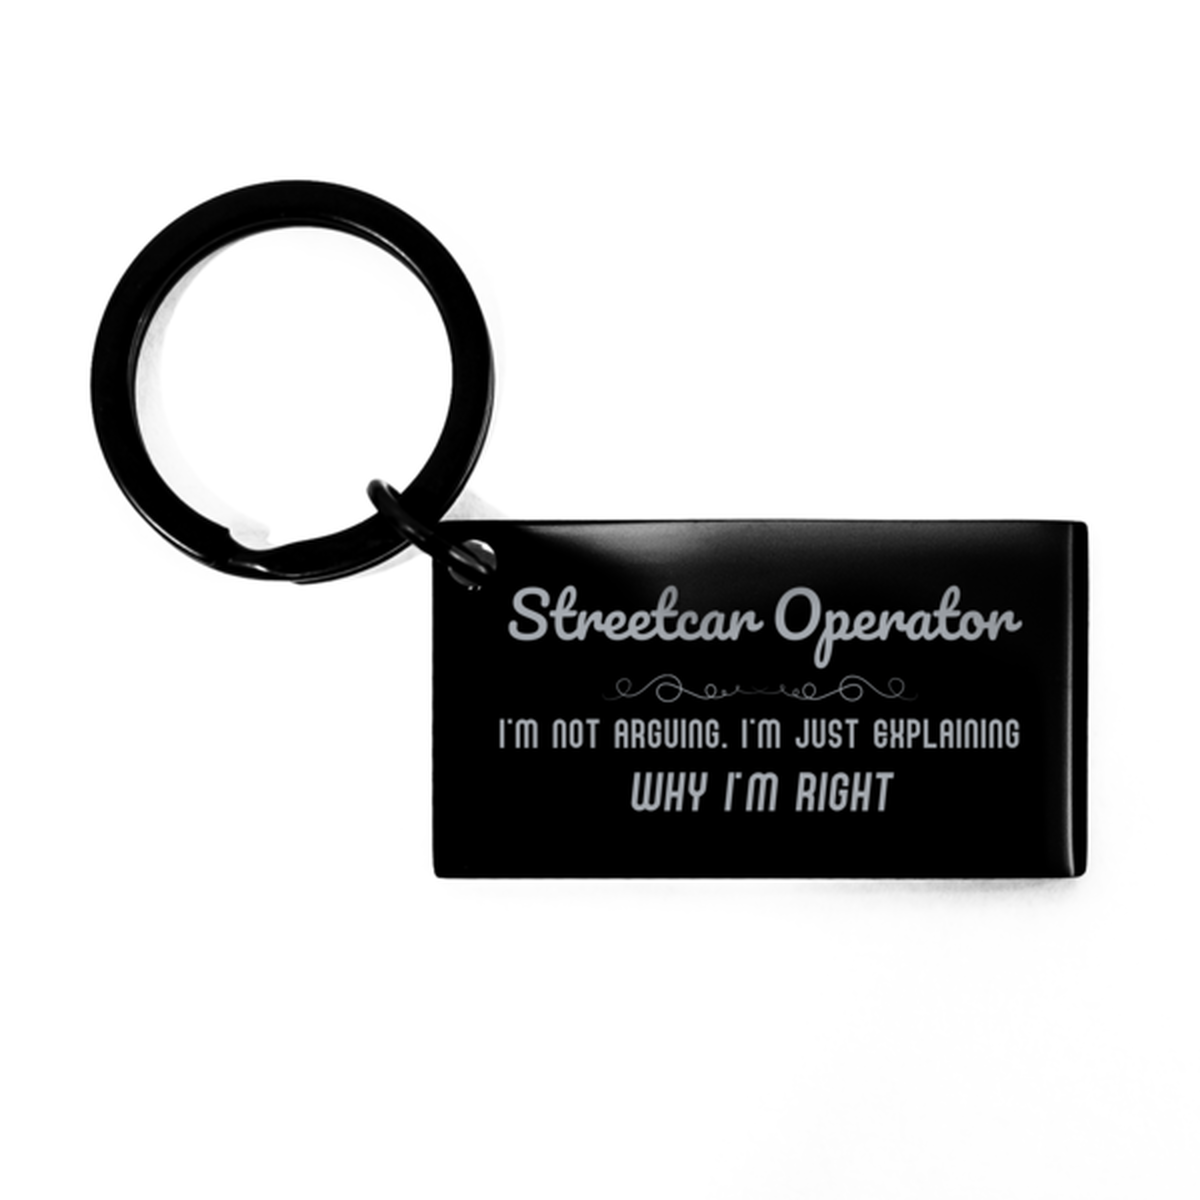 Streetcar Operator I'm not Arguing. I'm Just Explaining Why I'm RIGHT Keychain, Funny Saying Quote Streetcar Operator Gifts For Streetcar Operator Graduation Birthday Christmas Gifts for Men Women Coworker